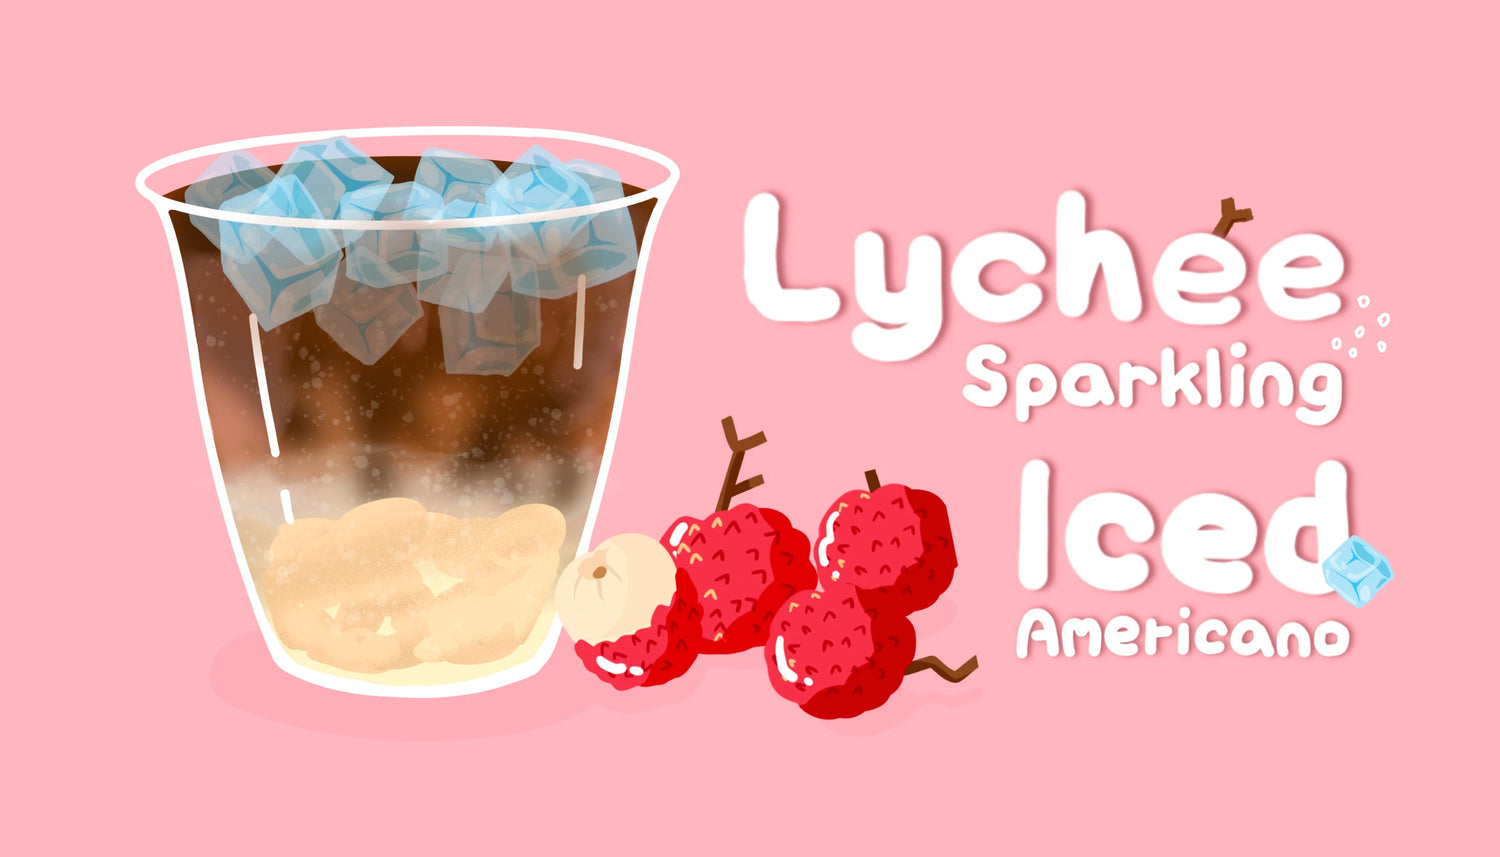 Summer Sipping: A Guide to Making Lychee Sparkling Iced Americano